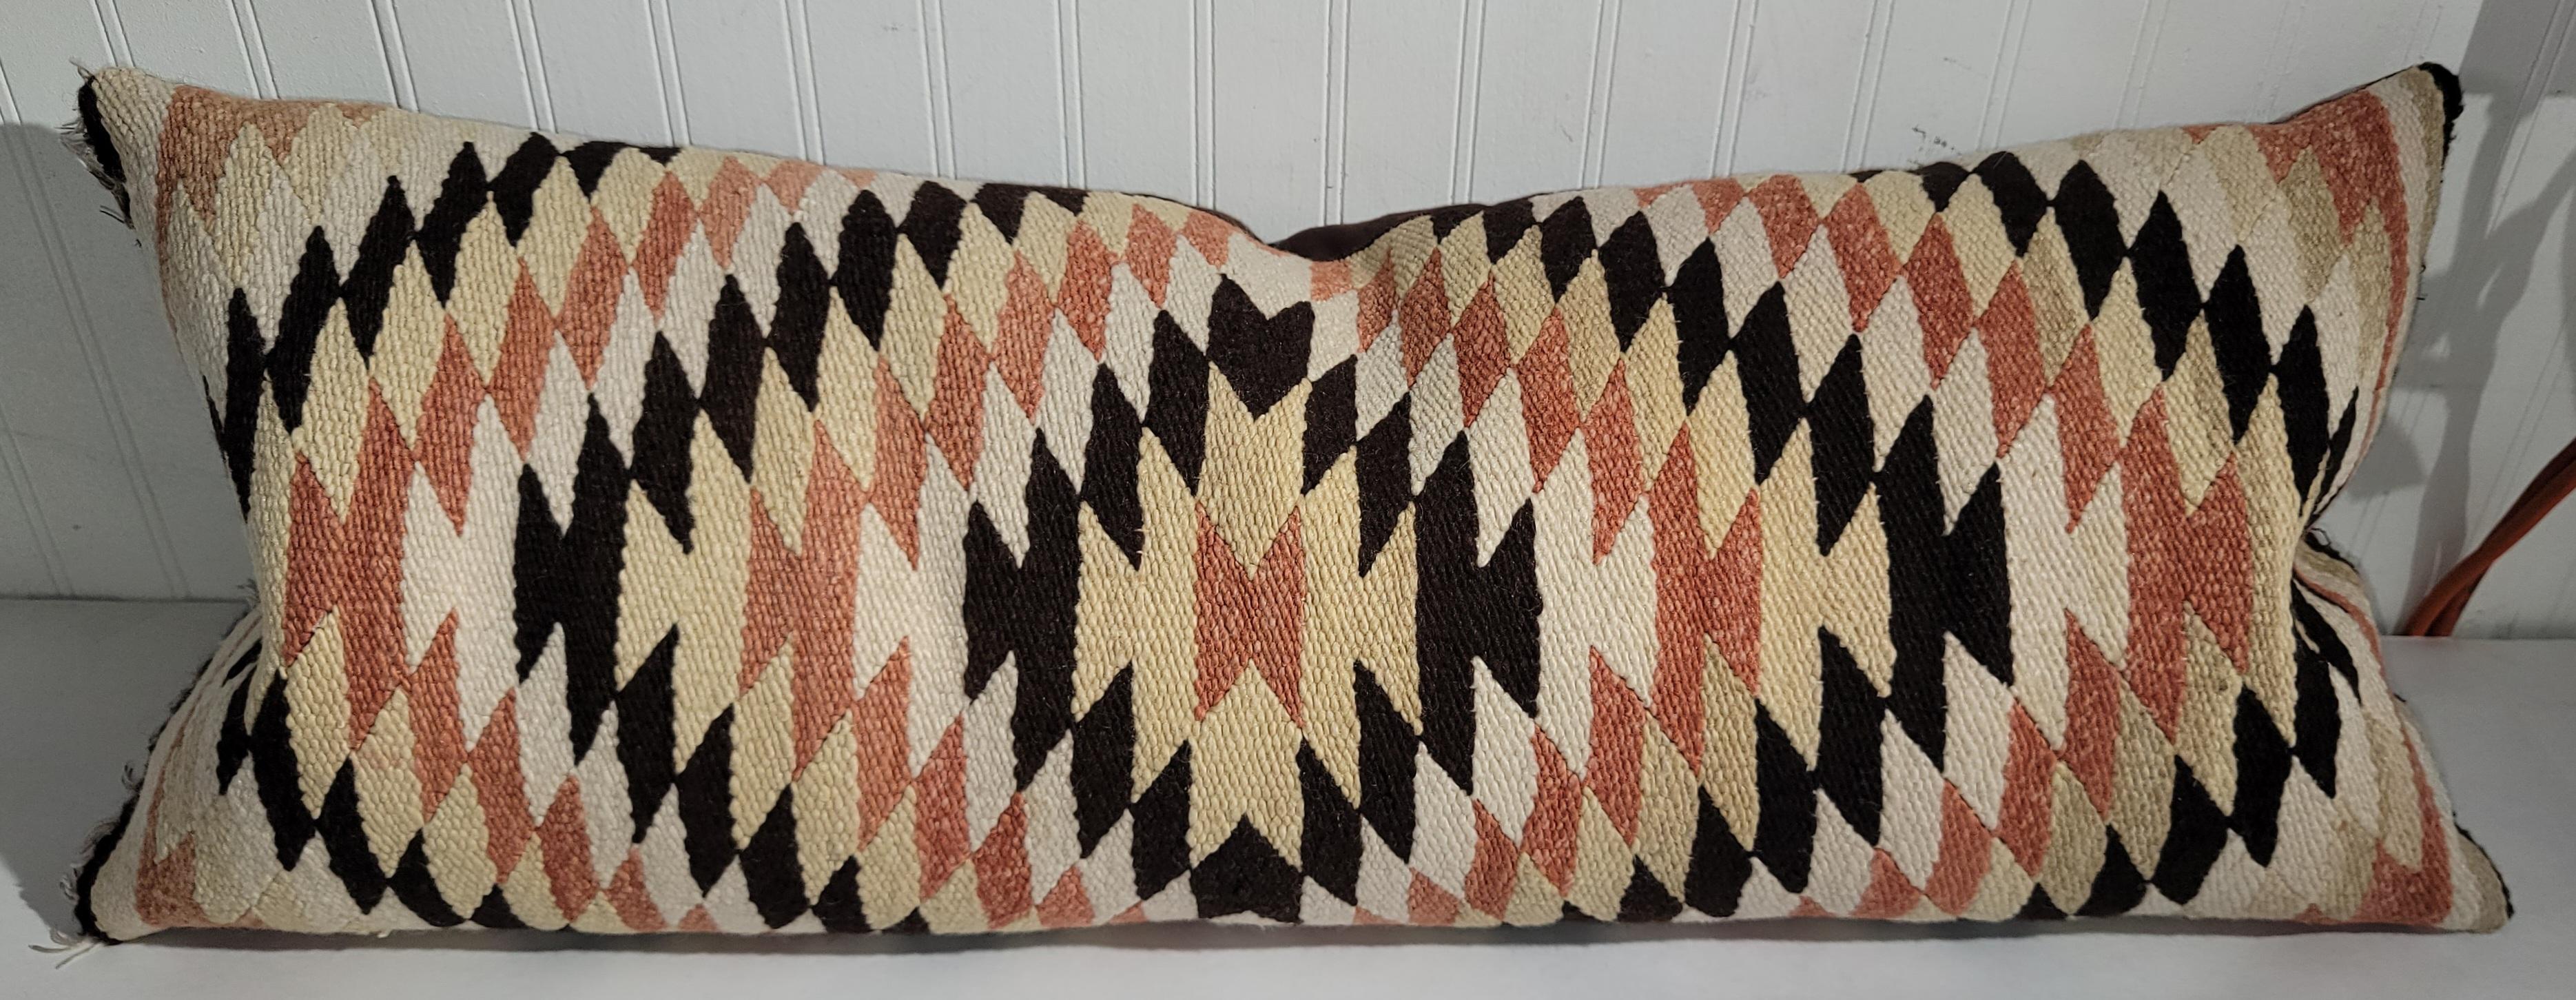 Set of three Navajo Indian Pillows chosen for their natural earth tones colors.
Different patterns that hold slight similarities in terms of patter. A multitude of sharp pattern edges throughout each pillow. Jigsaw and eye dazzlers in browns, beige